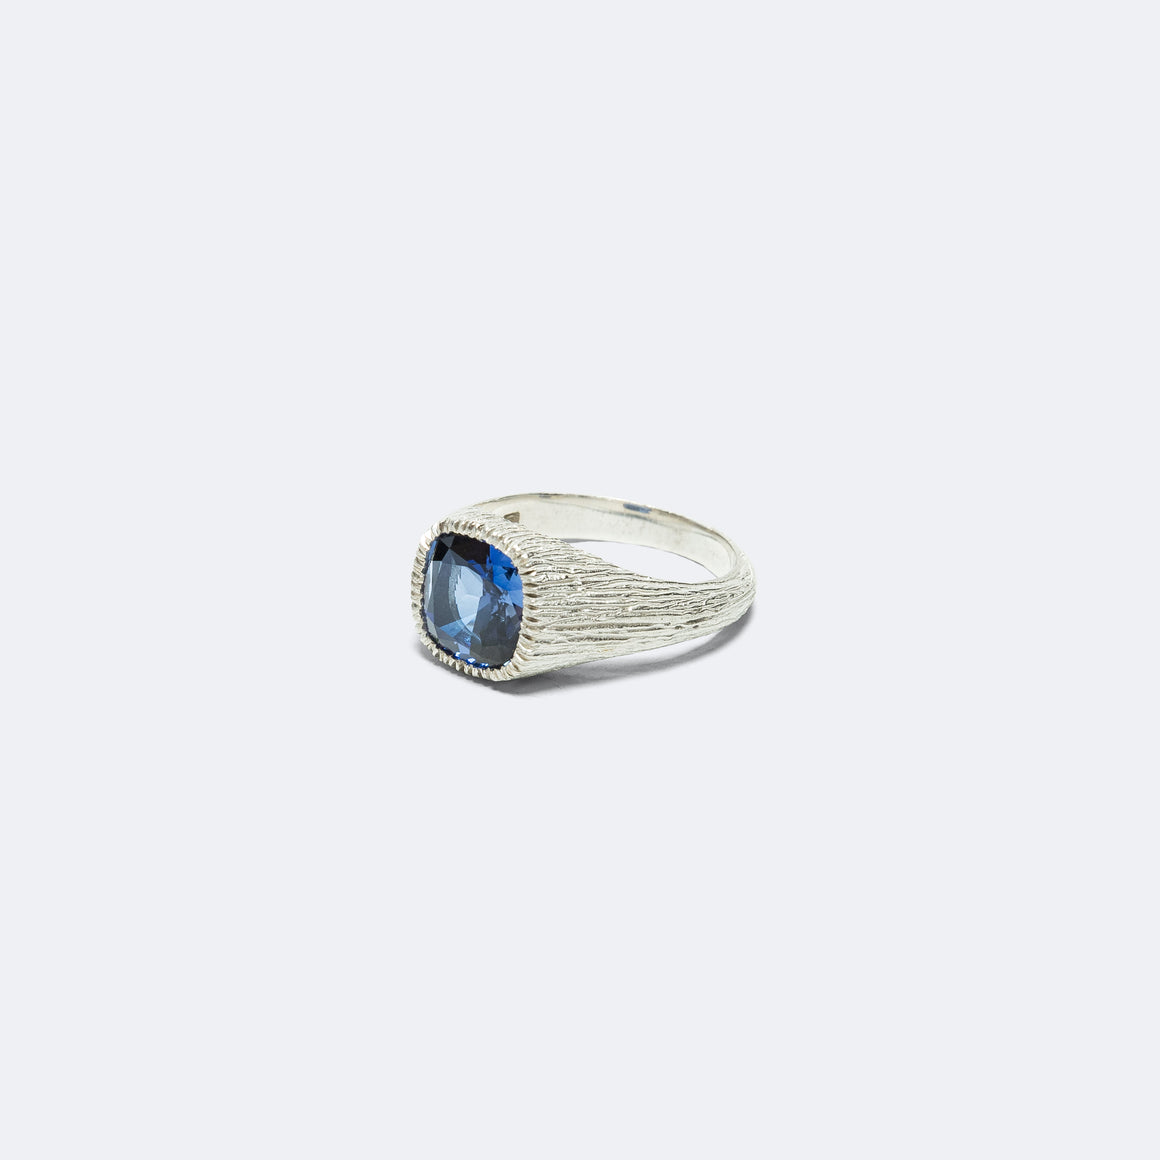 Natures Smile Signet Ring - Blue Sapphires/925 Silver